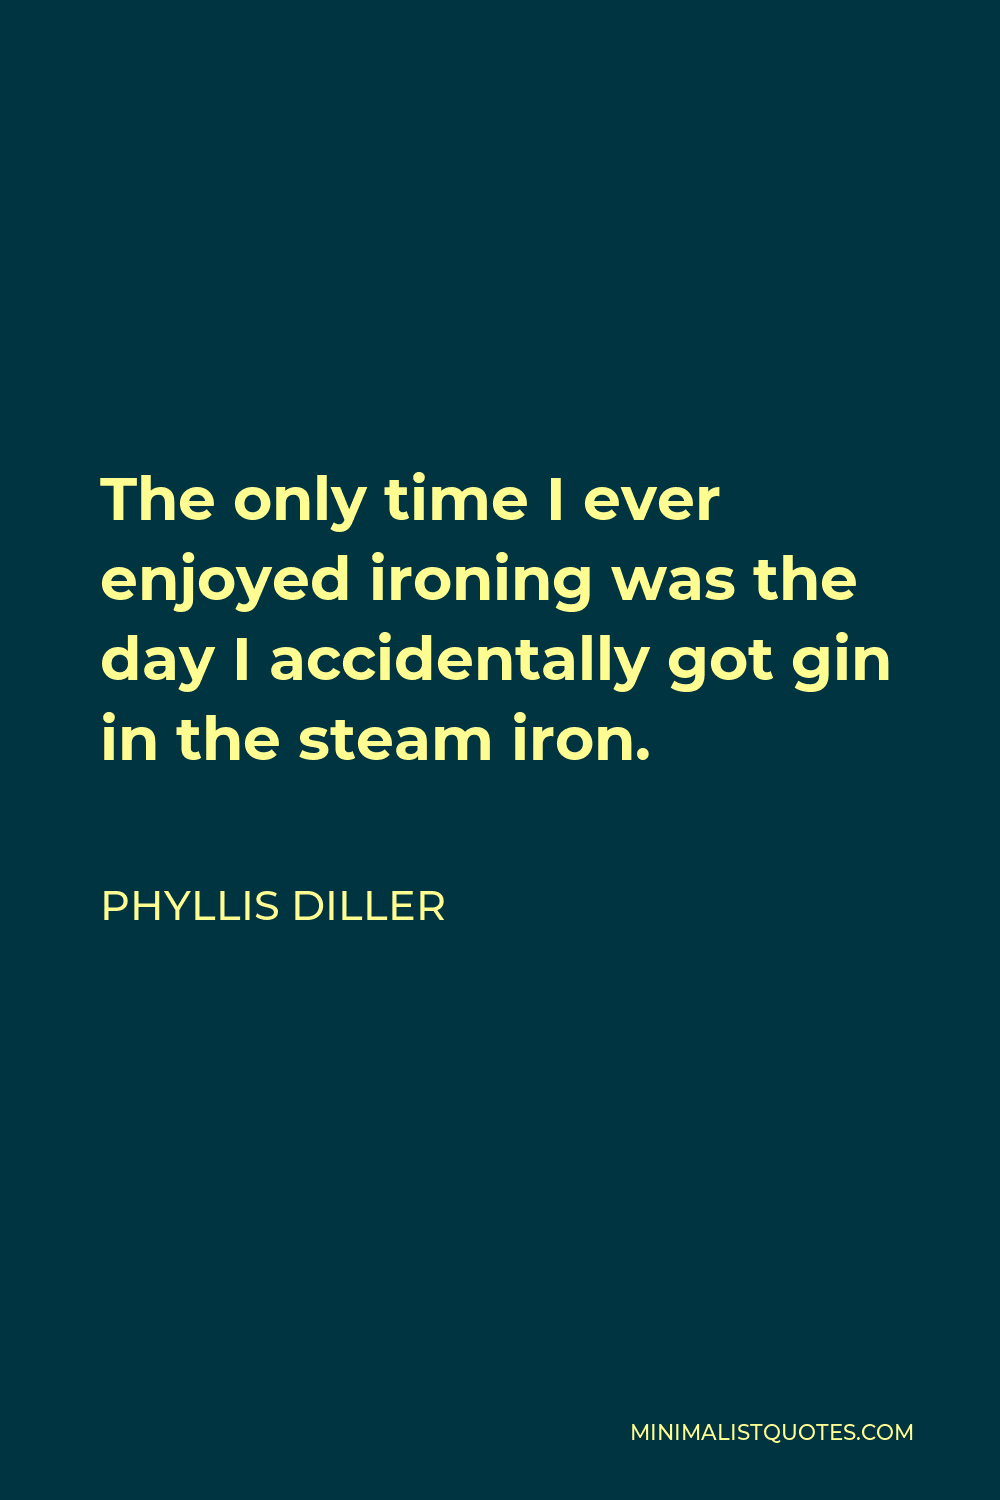 Phyllis Diller Quote - The only time I ever enjoyed ironing was the day I accidentally got gin in the steam iron.